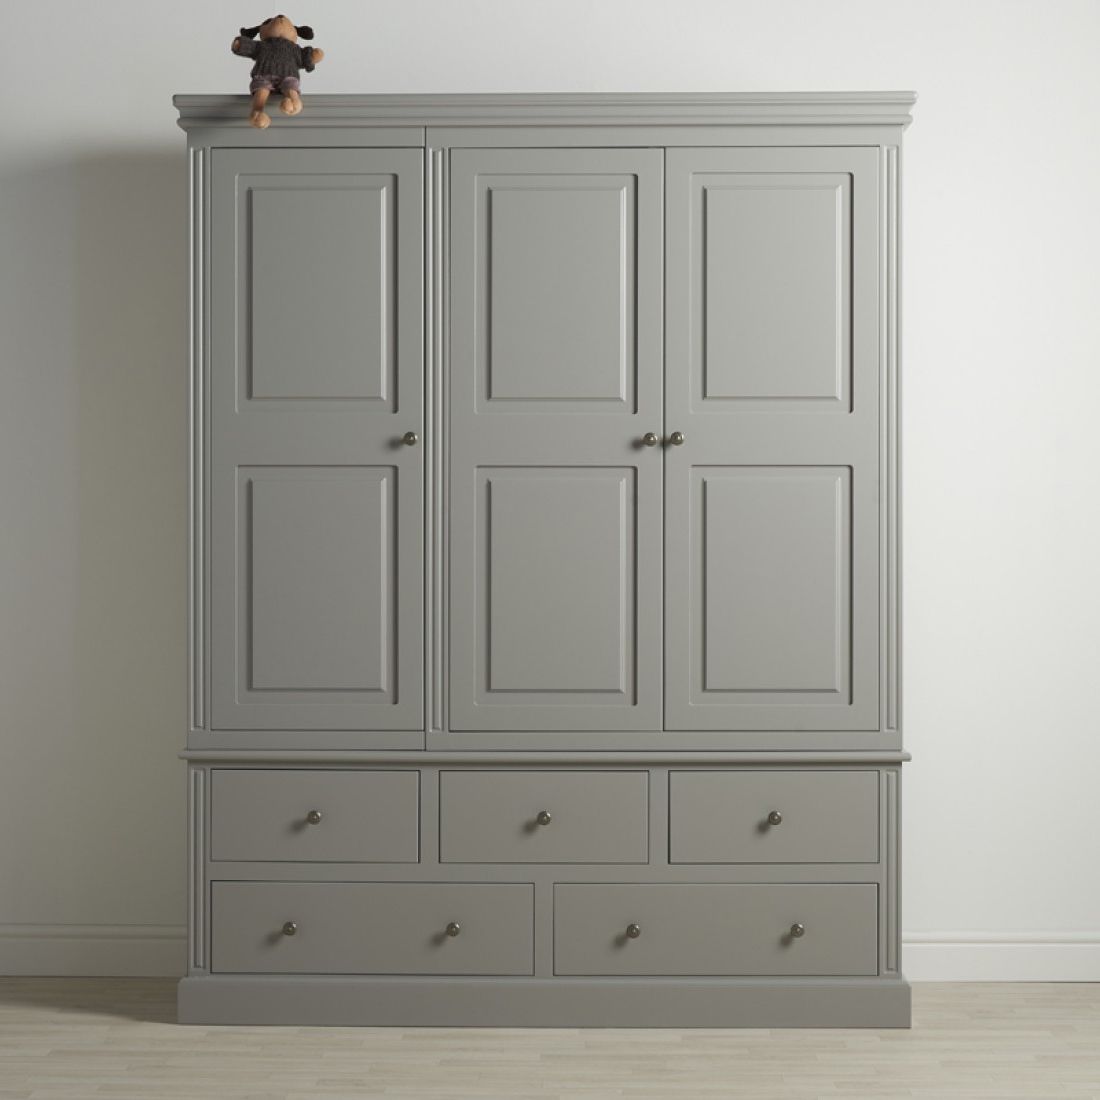 Dovecot 3 Door 5 Drawer Wardrobe|wardrobes|bedrooms| Furniture Inside Wardrobes With 3 Drawers (View 14 of 20)